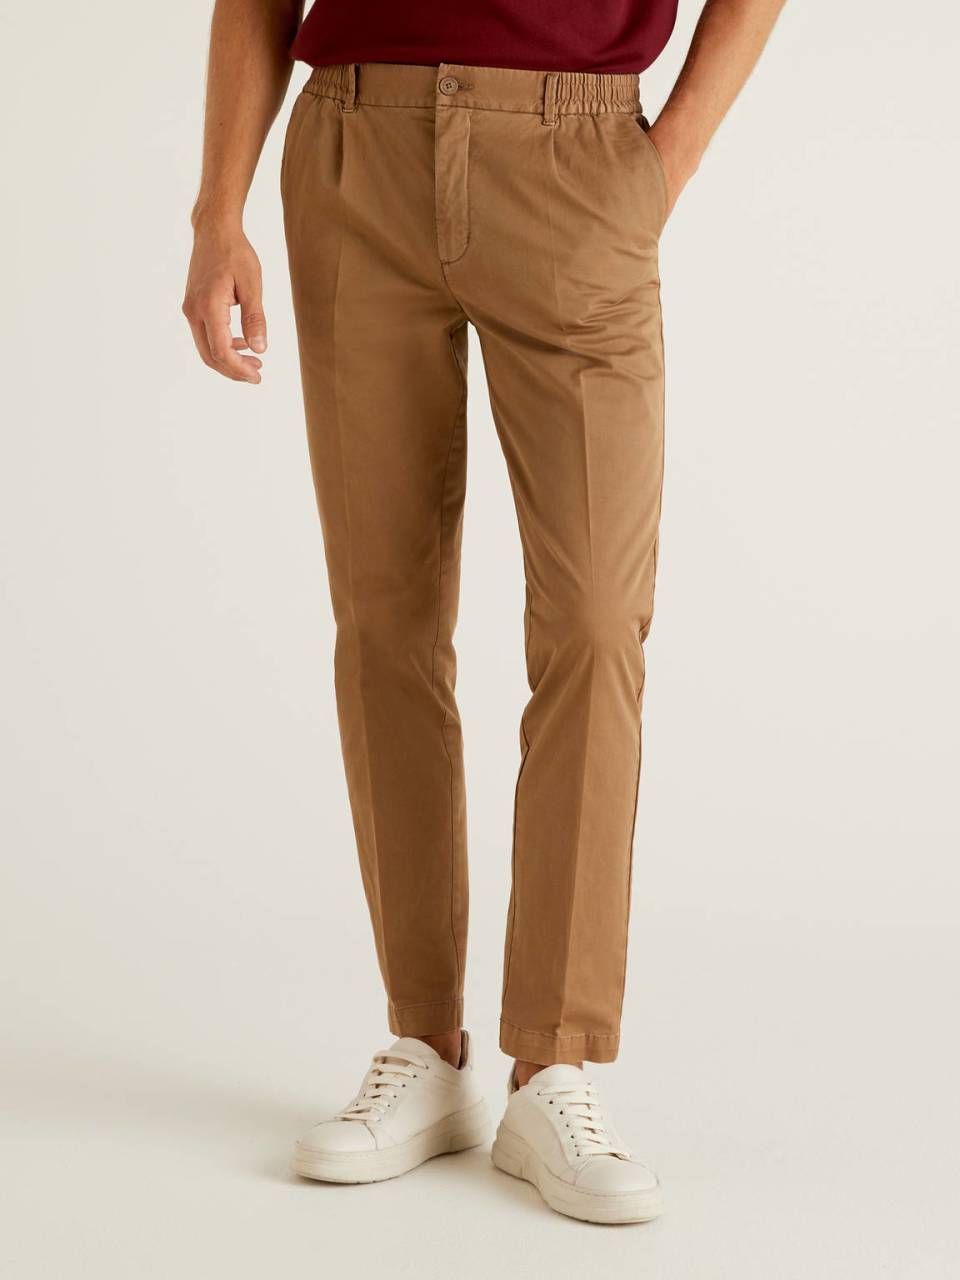 Benetton Trousers with elastic waist. 1